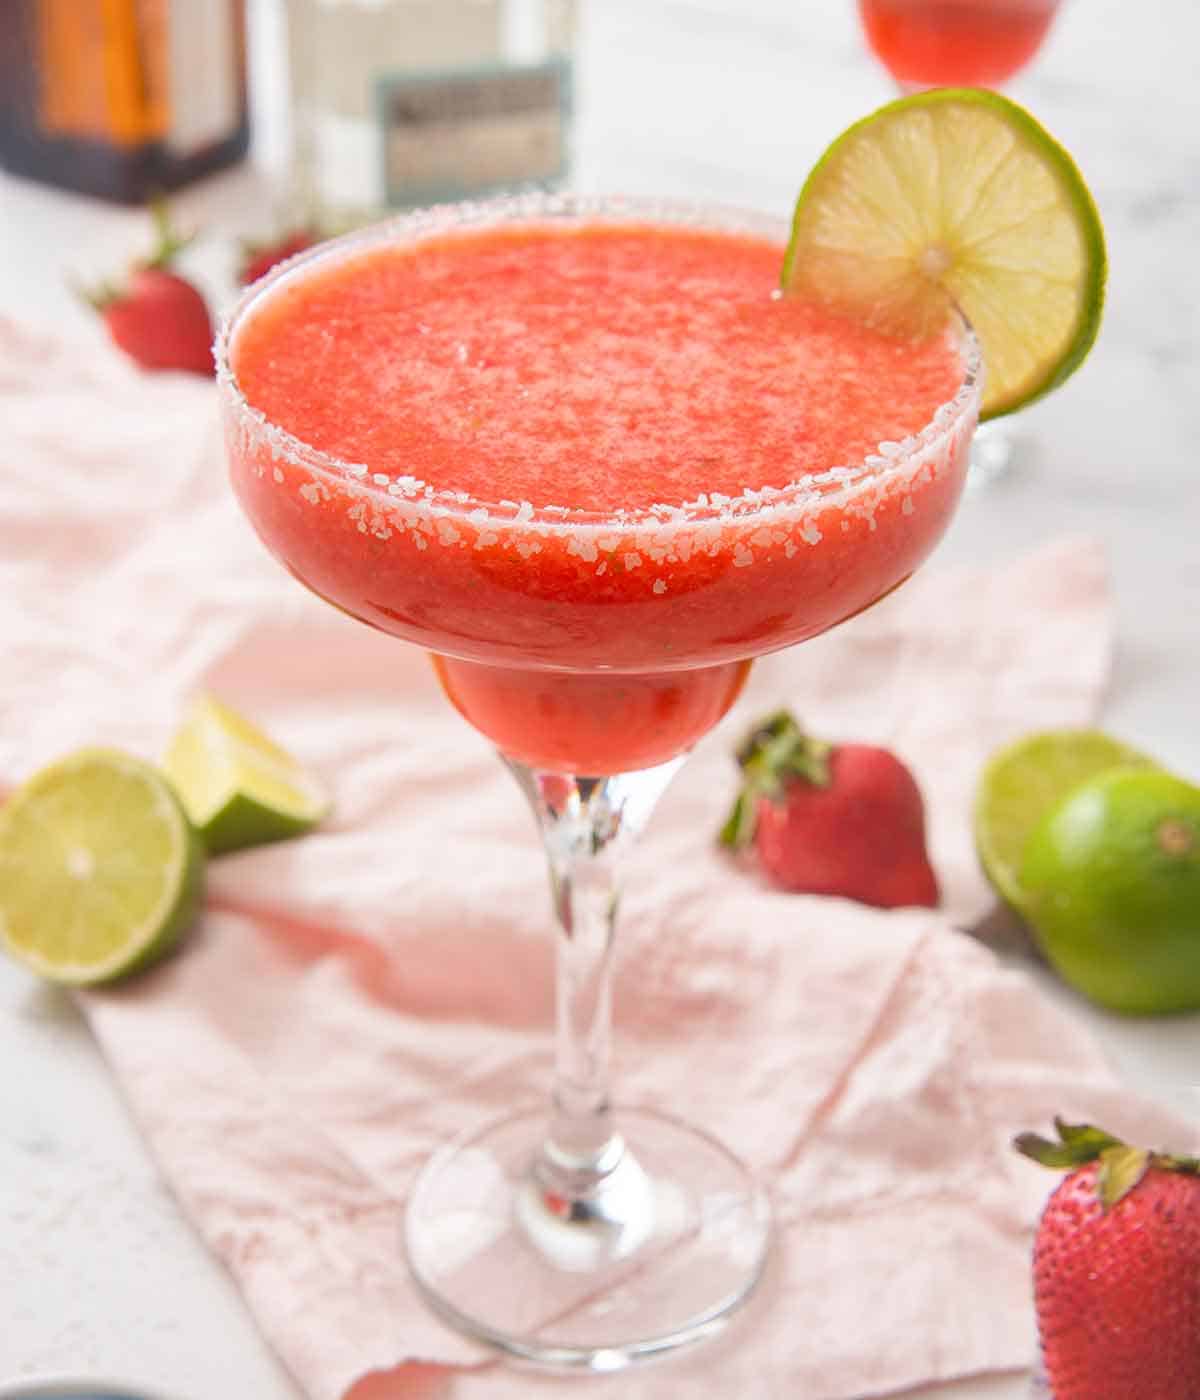 A cocktail glass filled with a pink strawberry margarita with a lime slice on the rim on top of a pink linen napkin with cut limes and strawberries scattered around.